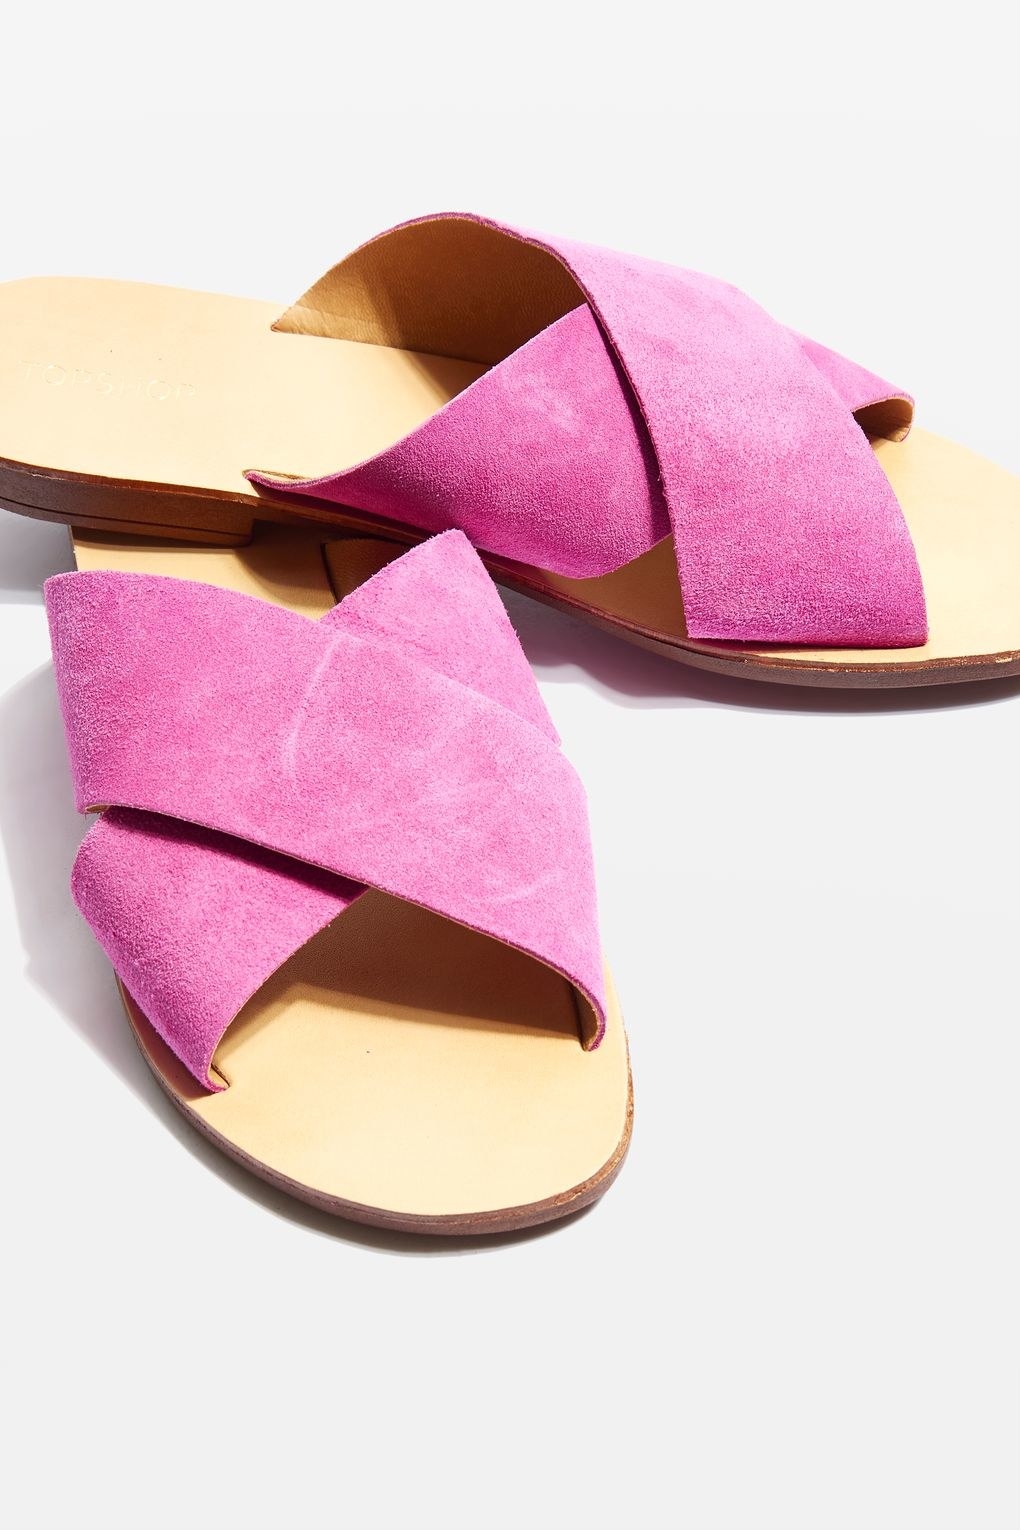 29 Awesome And Inexpensive Sandals You'll Want To Buy ASAP